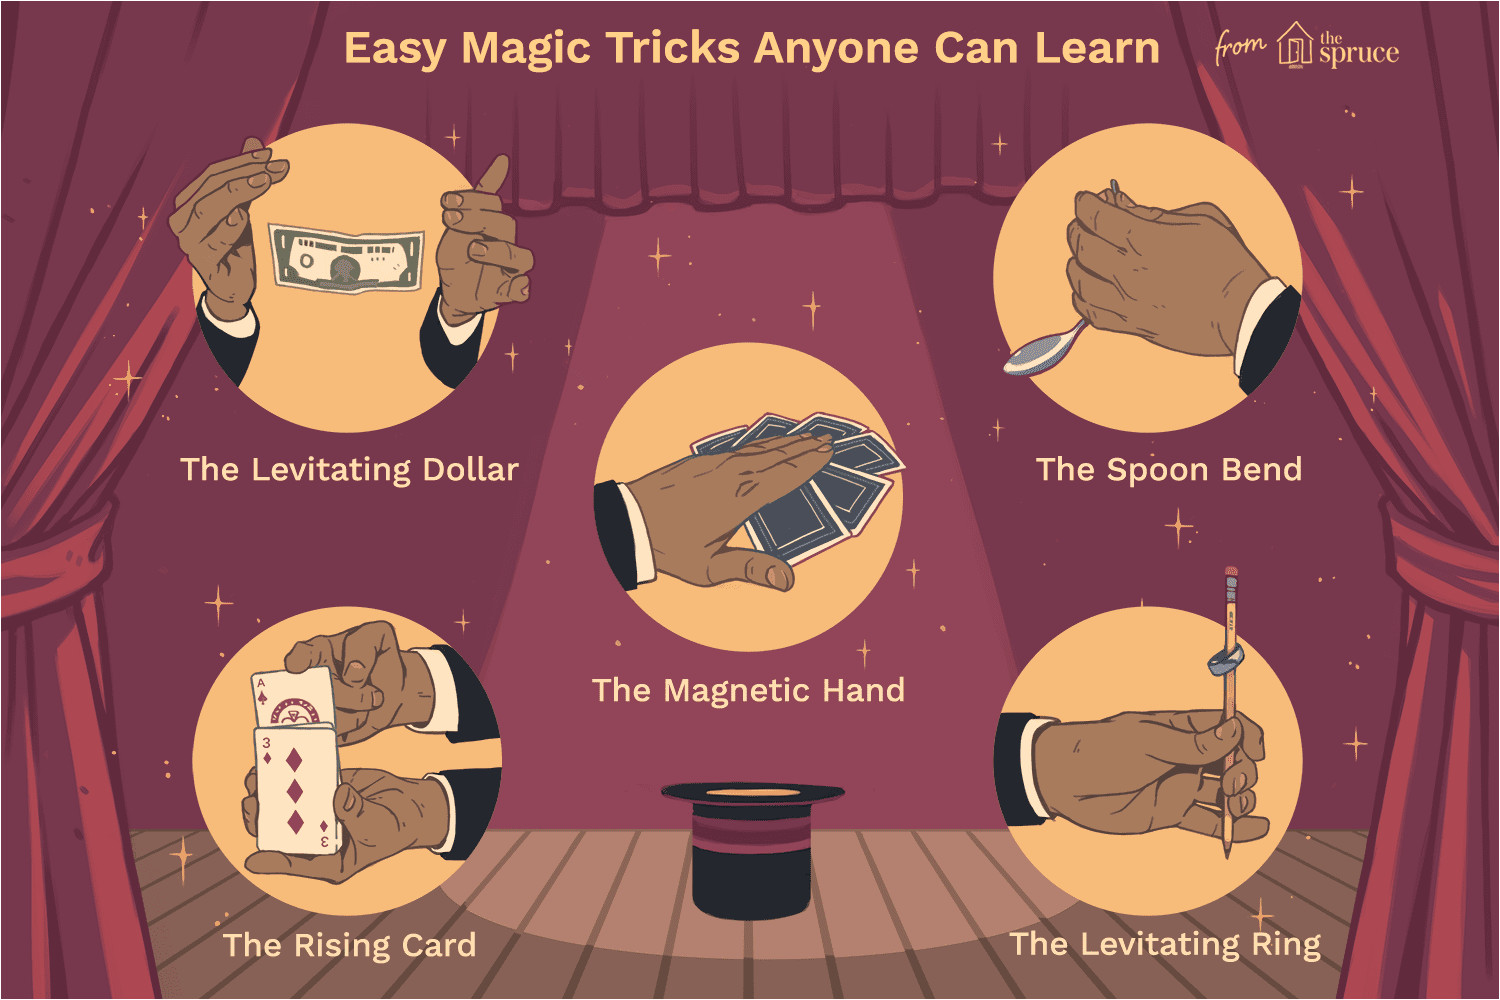 learn and perform easy magic tricks add 4121915 final 055a28bc695642e0a234b6c923f88261 png